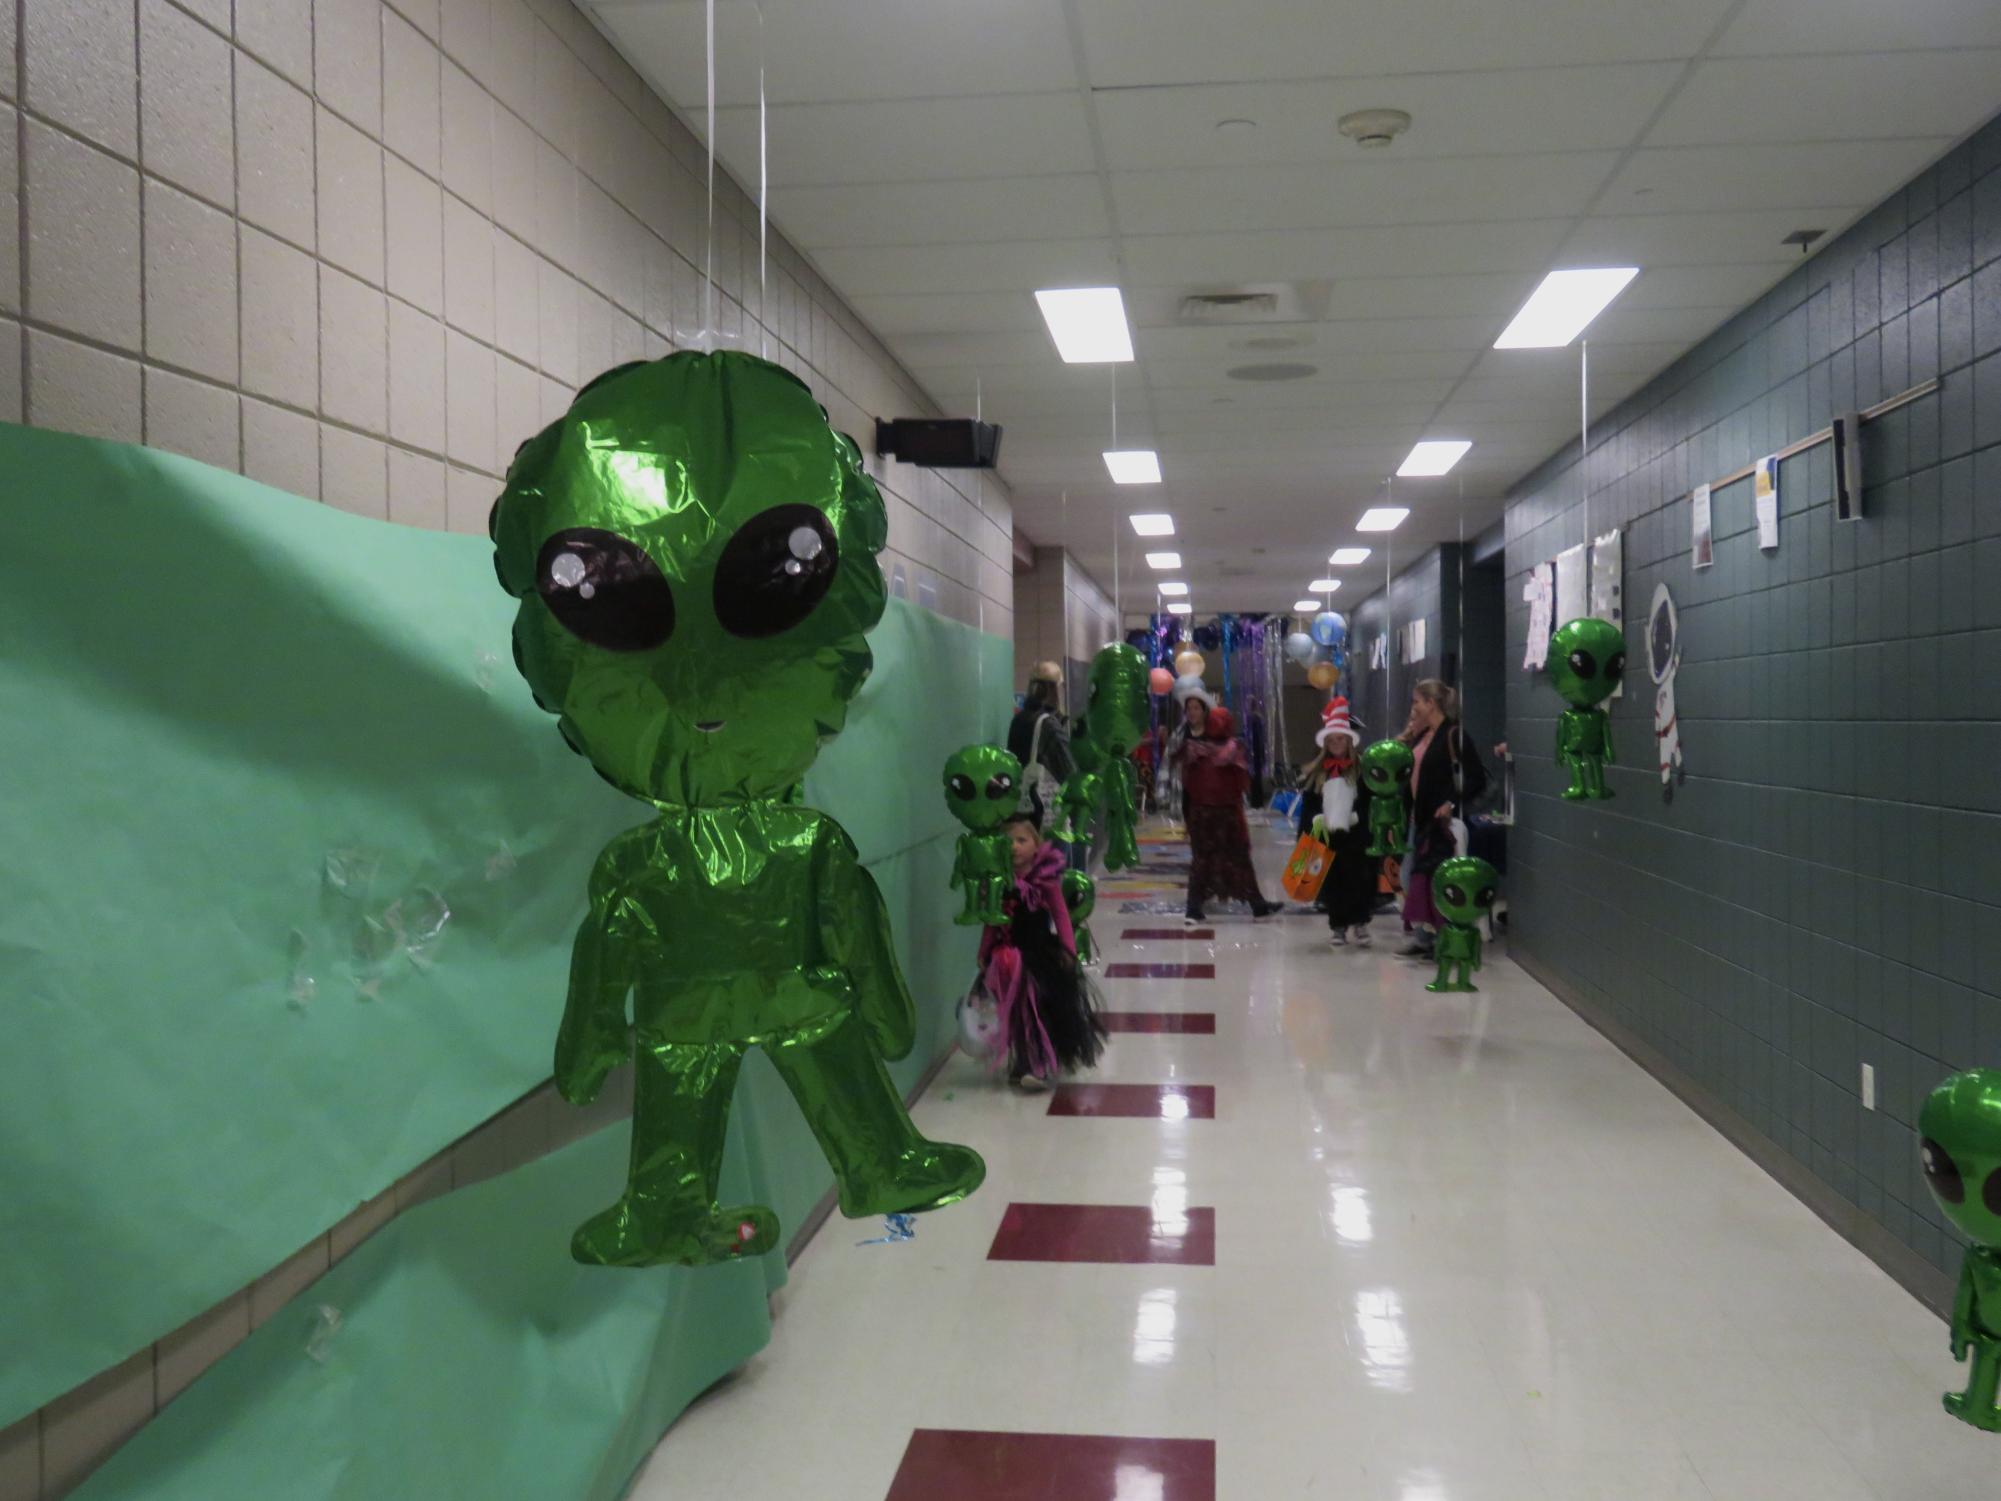 Kids interacted with friendly aliens as they battled their way through space, receiving candy as they went. 